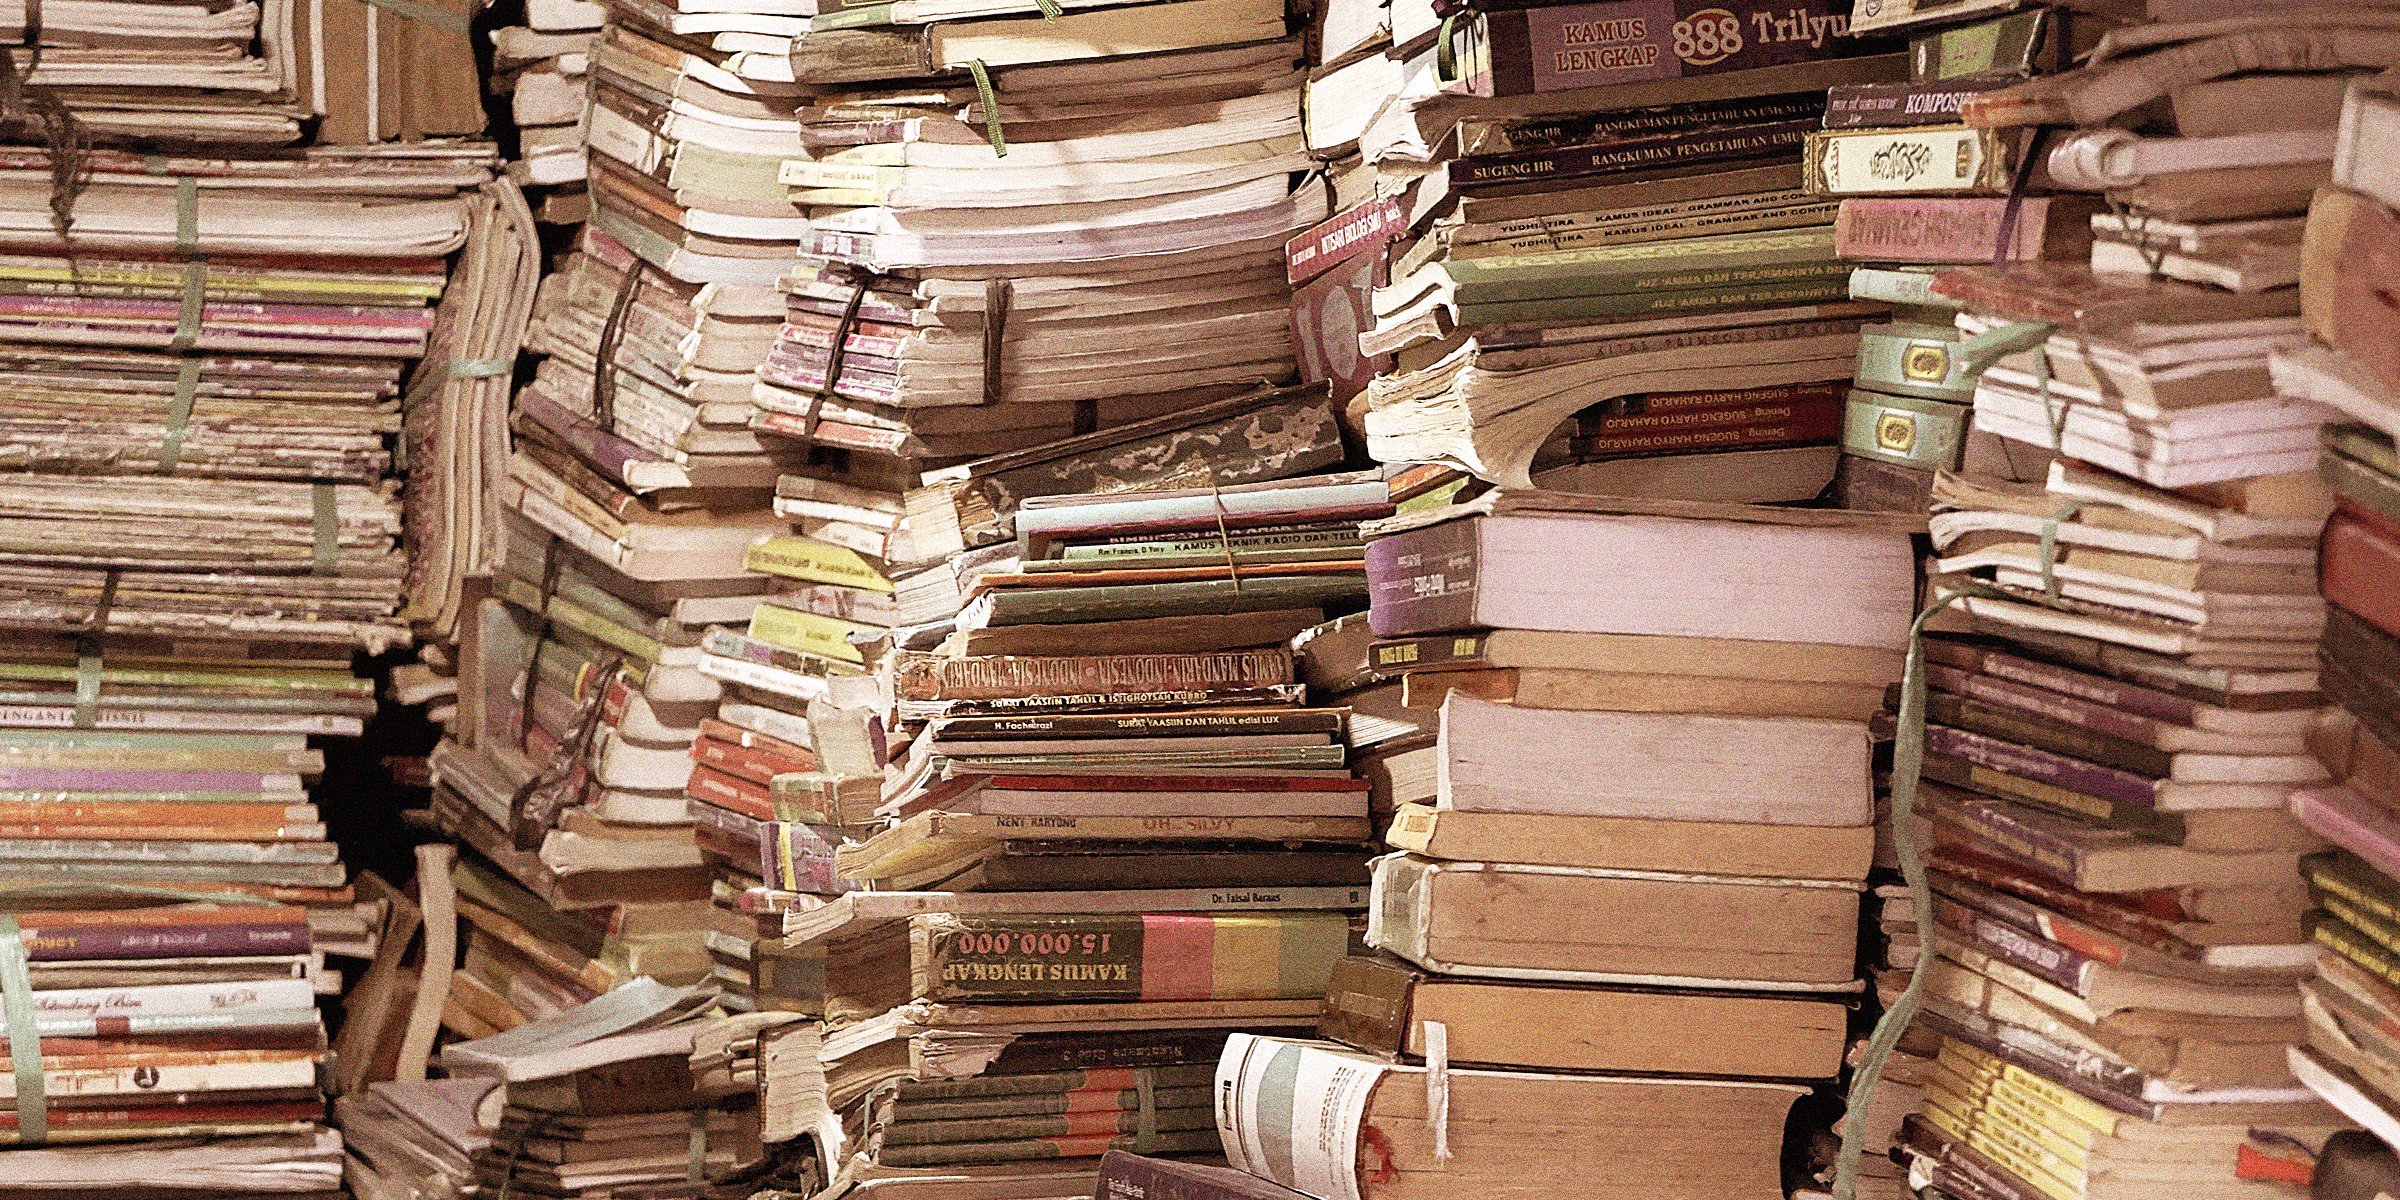 large number of stacked books | Source: Unsplash